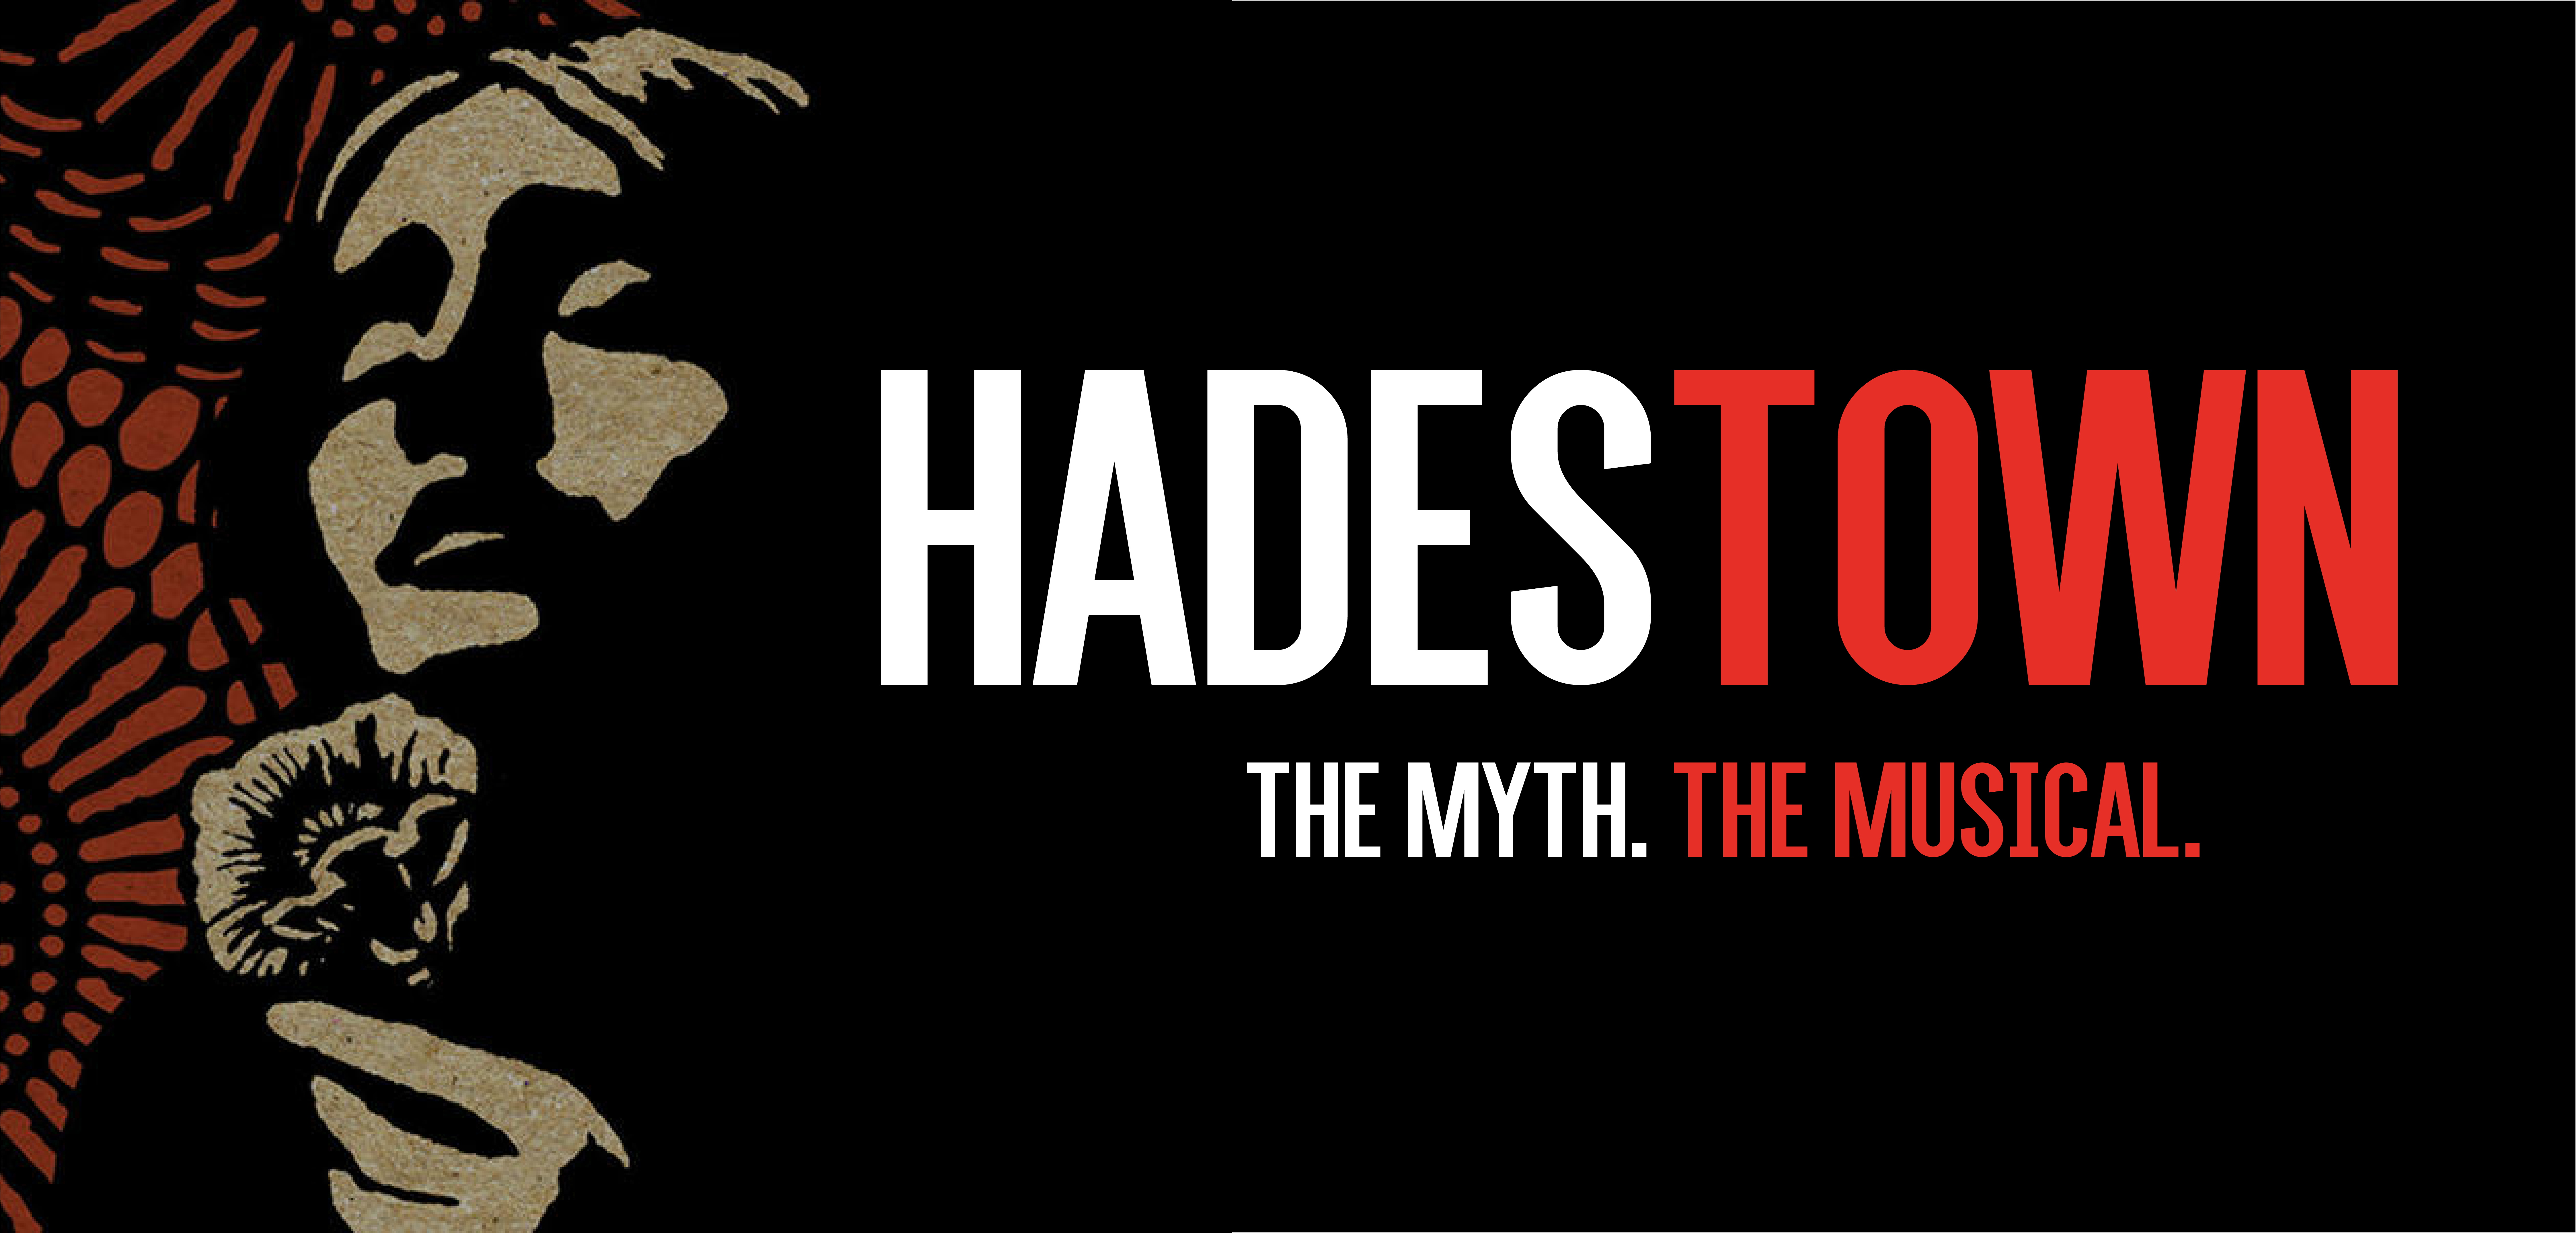 Theatre within the Budget: Hadestown.